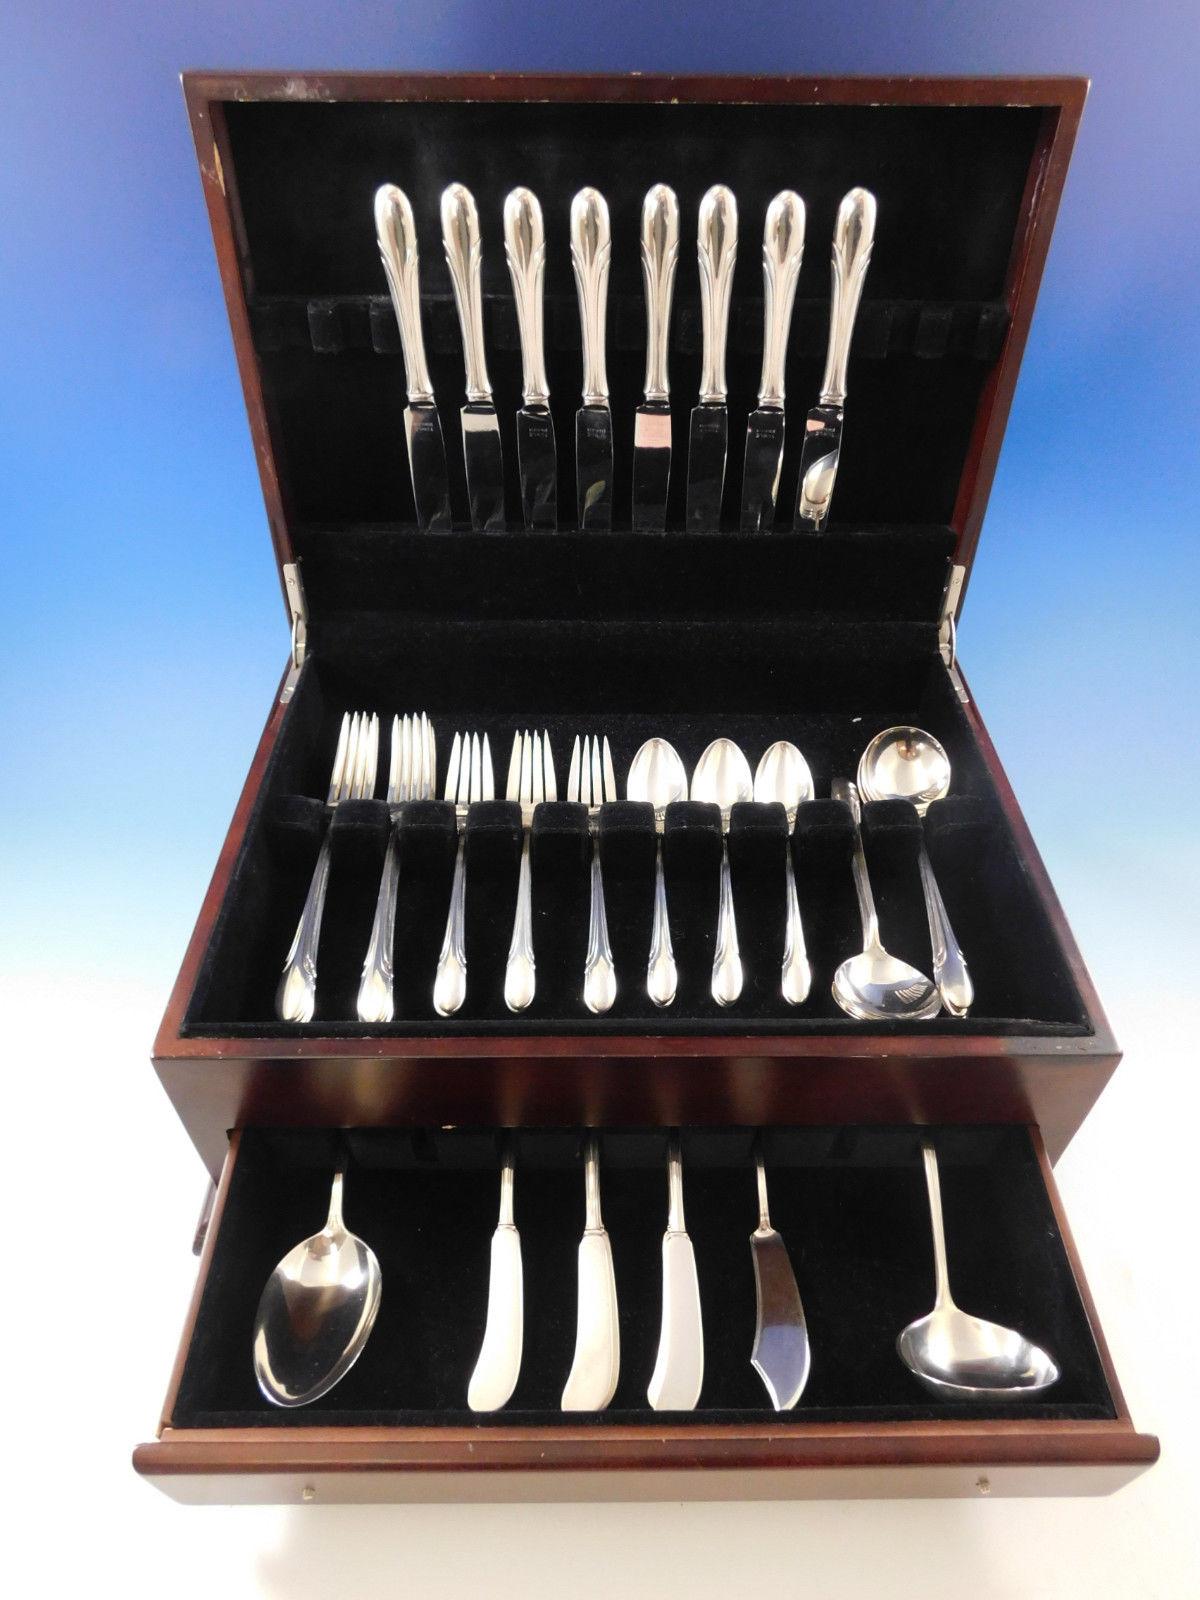 Symphony by Towle sterling silver Flatware set, 51 pieces. This set includes:

Eight knives, 8 7/8